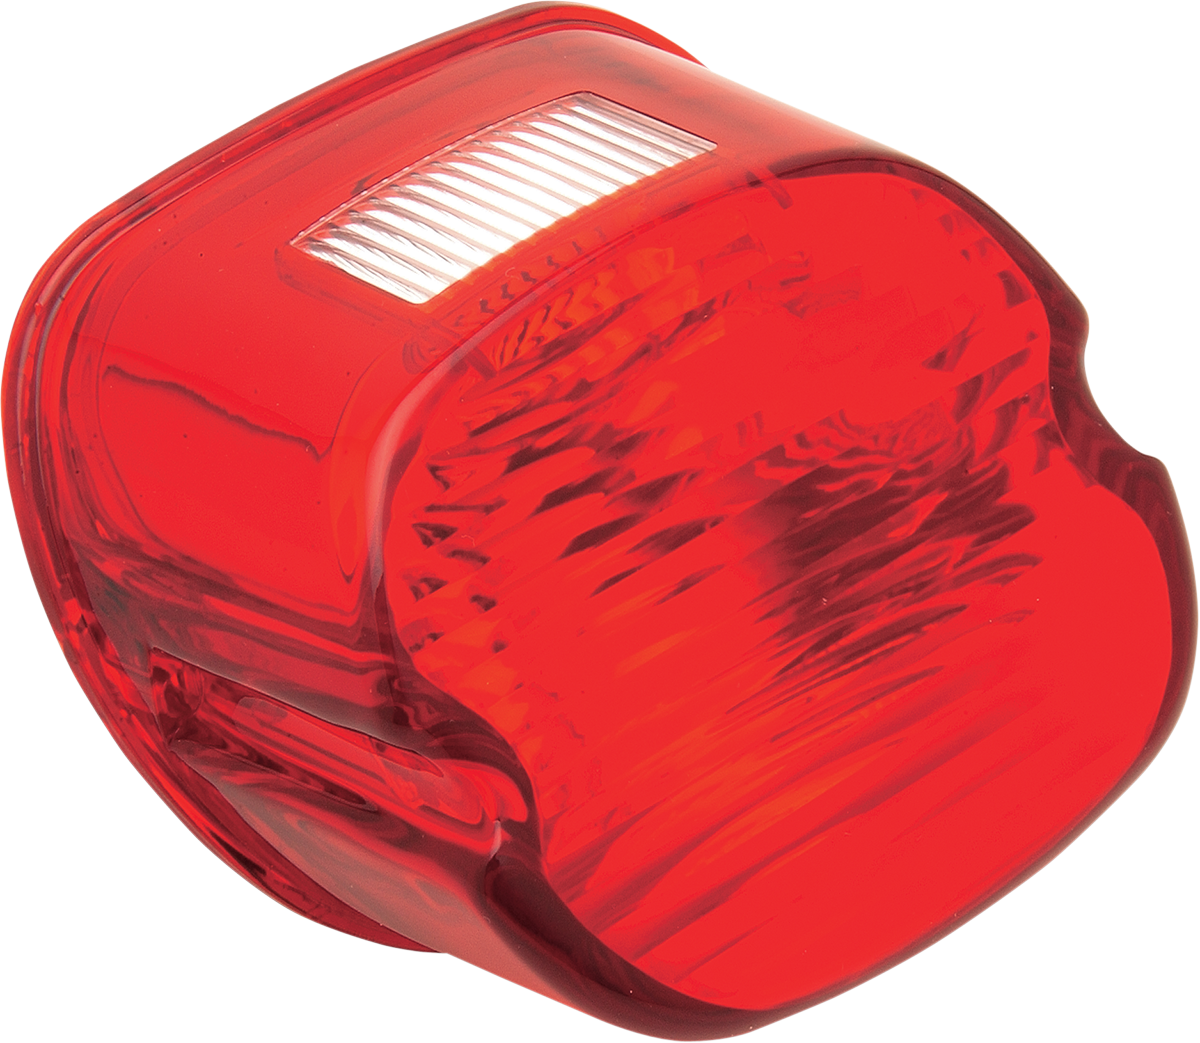 DRAG SPECIALTIES Laydown Taillight Lens - Red 12-0018C-BC446